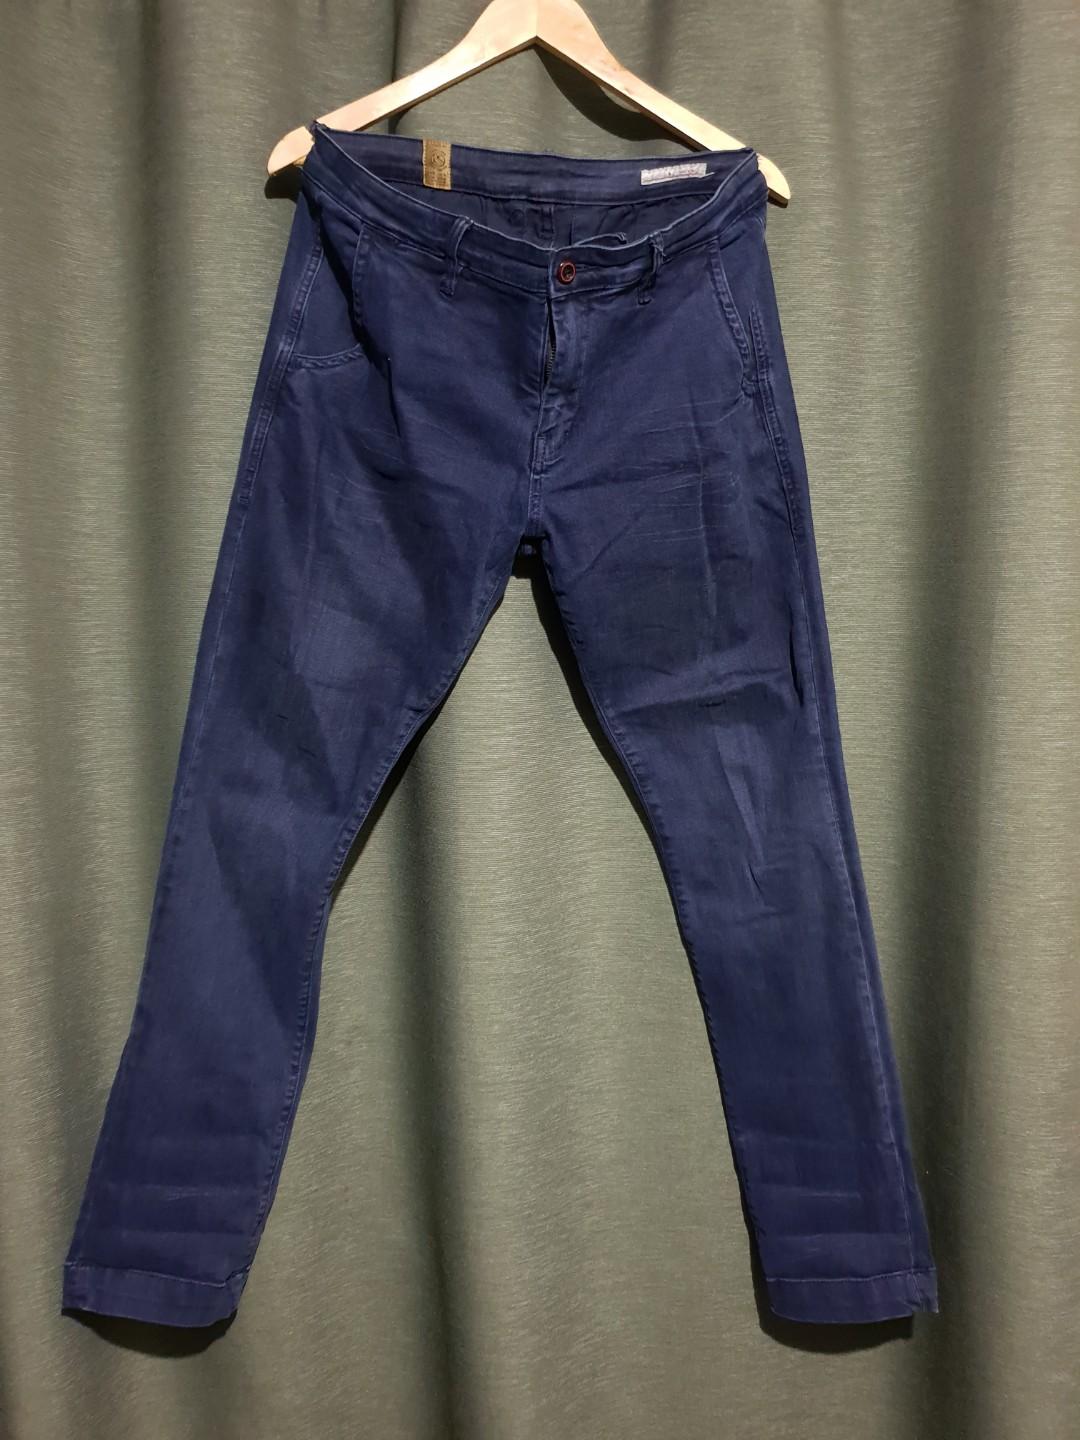 replay red seal jeans